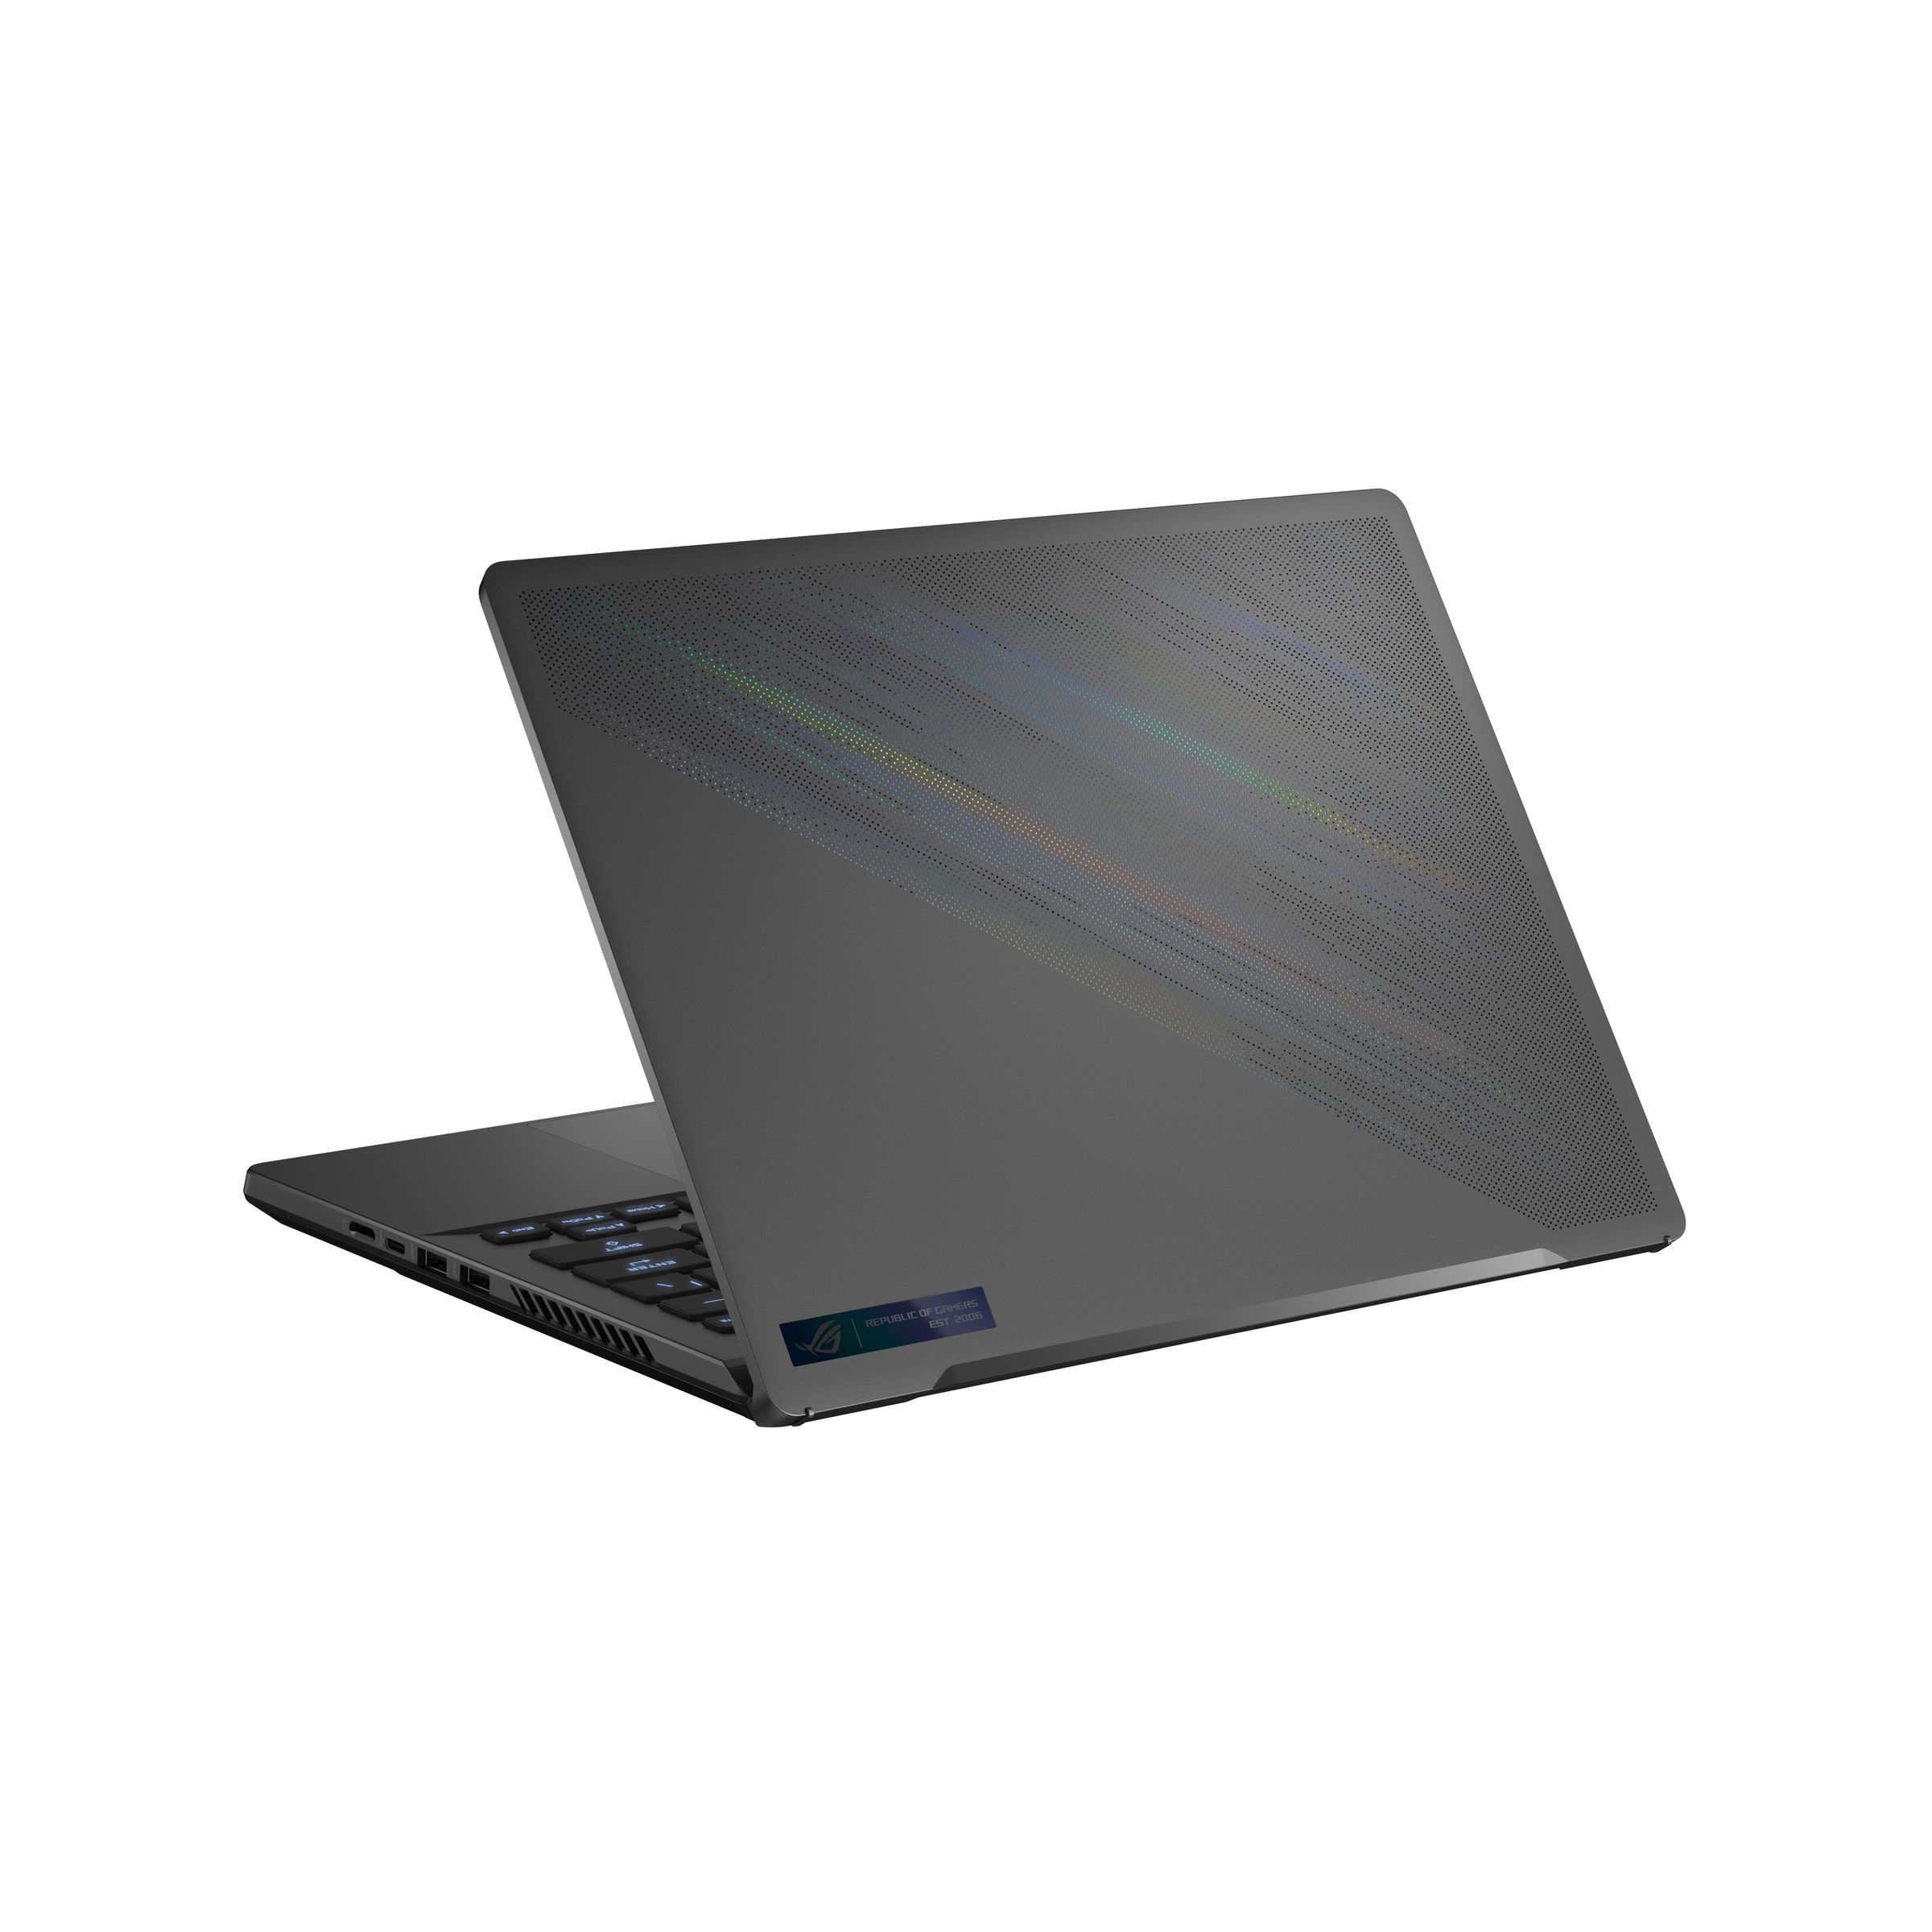 A black Asus ROG Zephyrus G14 seen from behind half open on a white background.